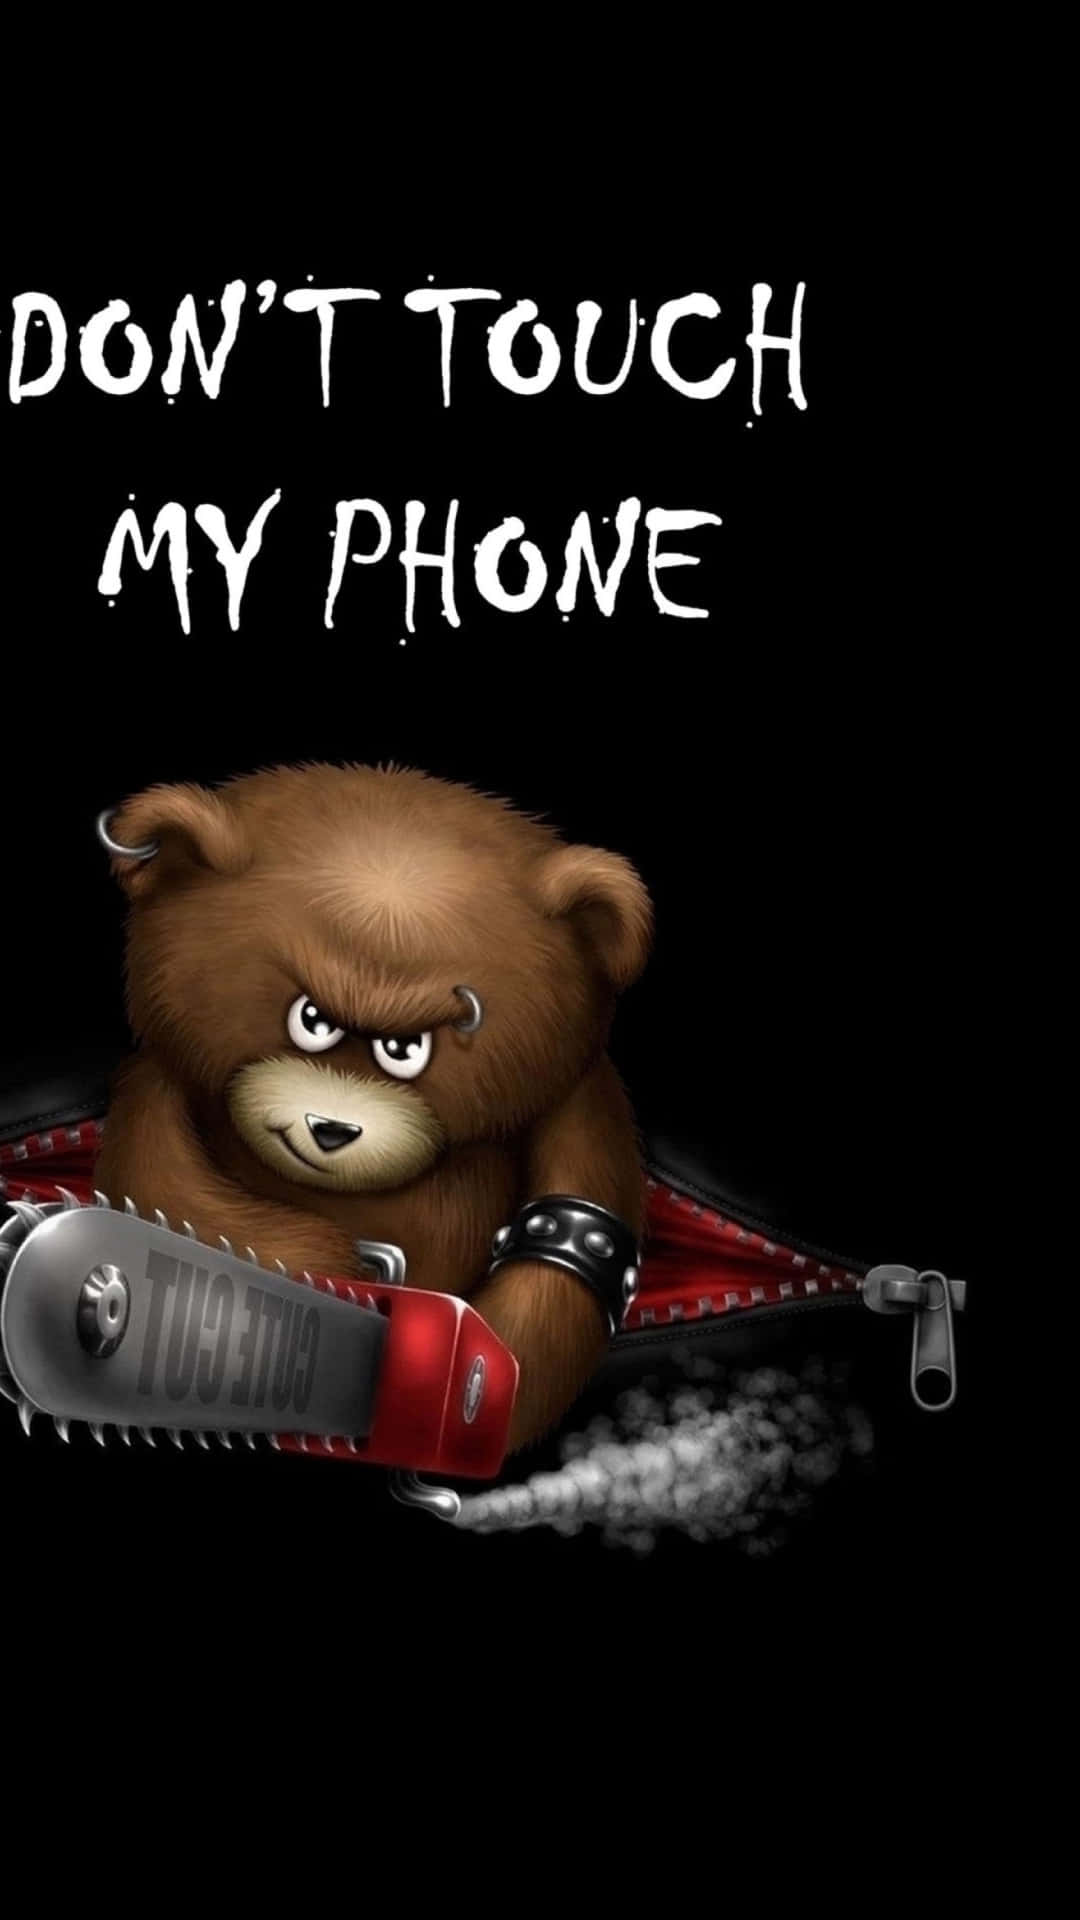 Don't Touch My Phone Teddy Bear Wallpaper